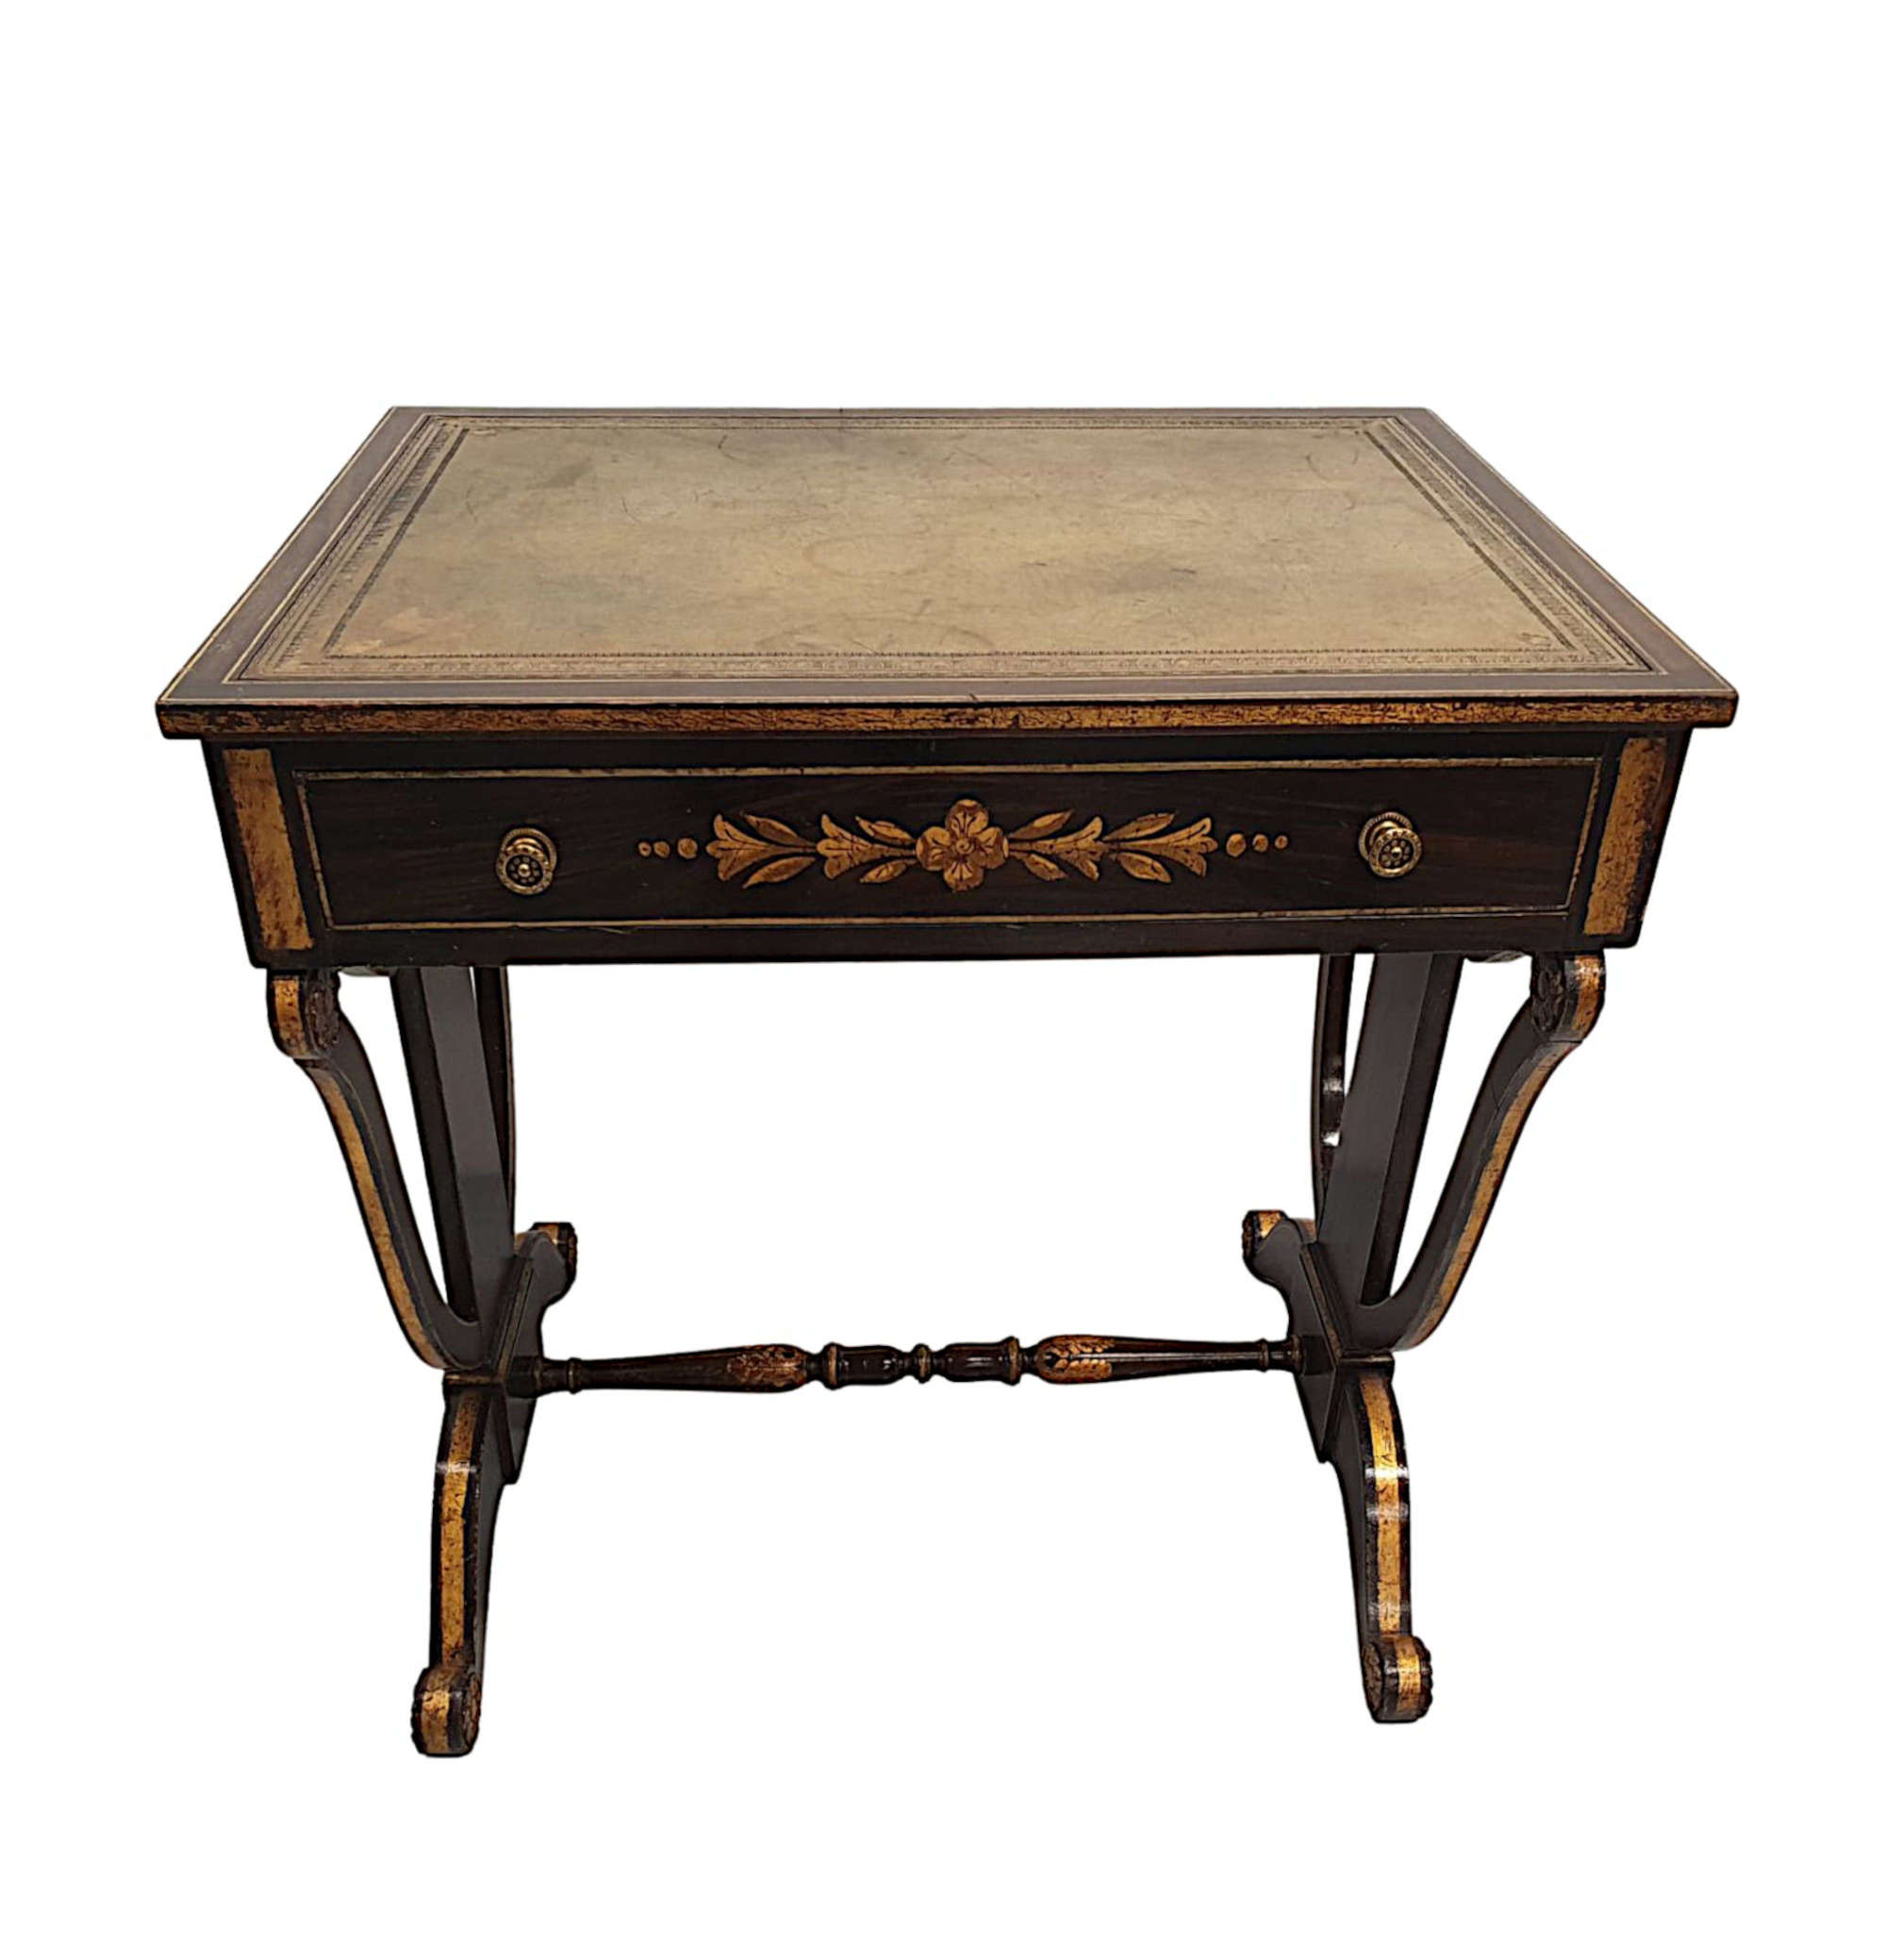 A Fine And Rare Early 19th Century American Baltimore Federal Parcel Gilt Writing Desk